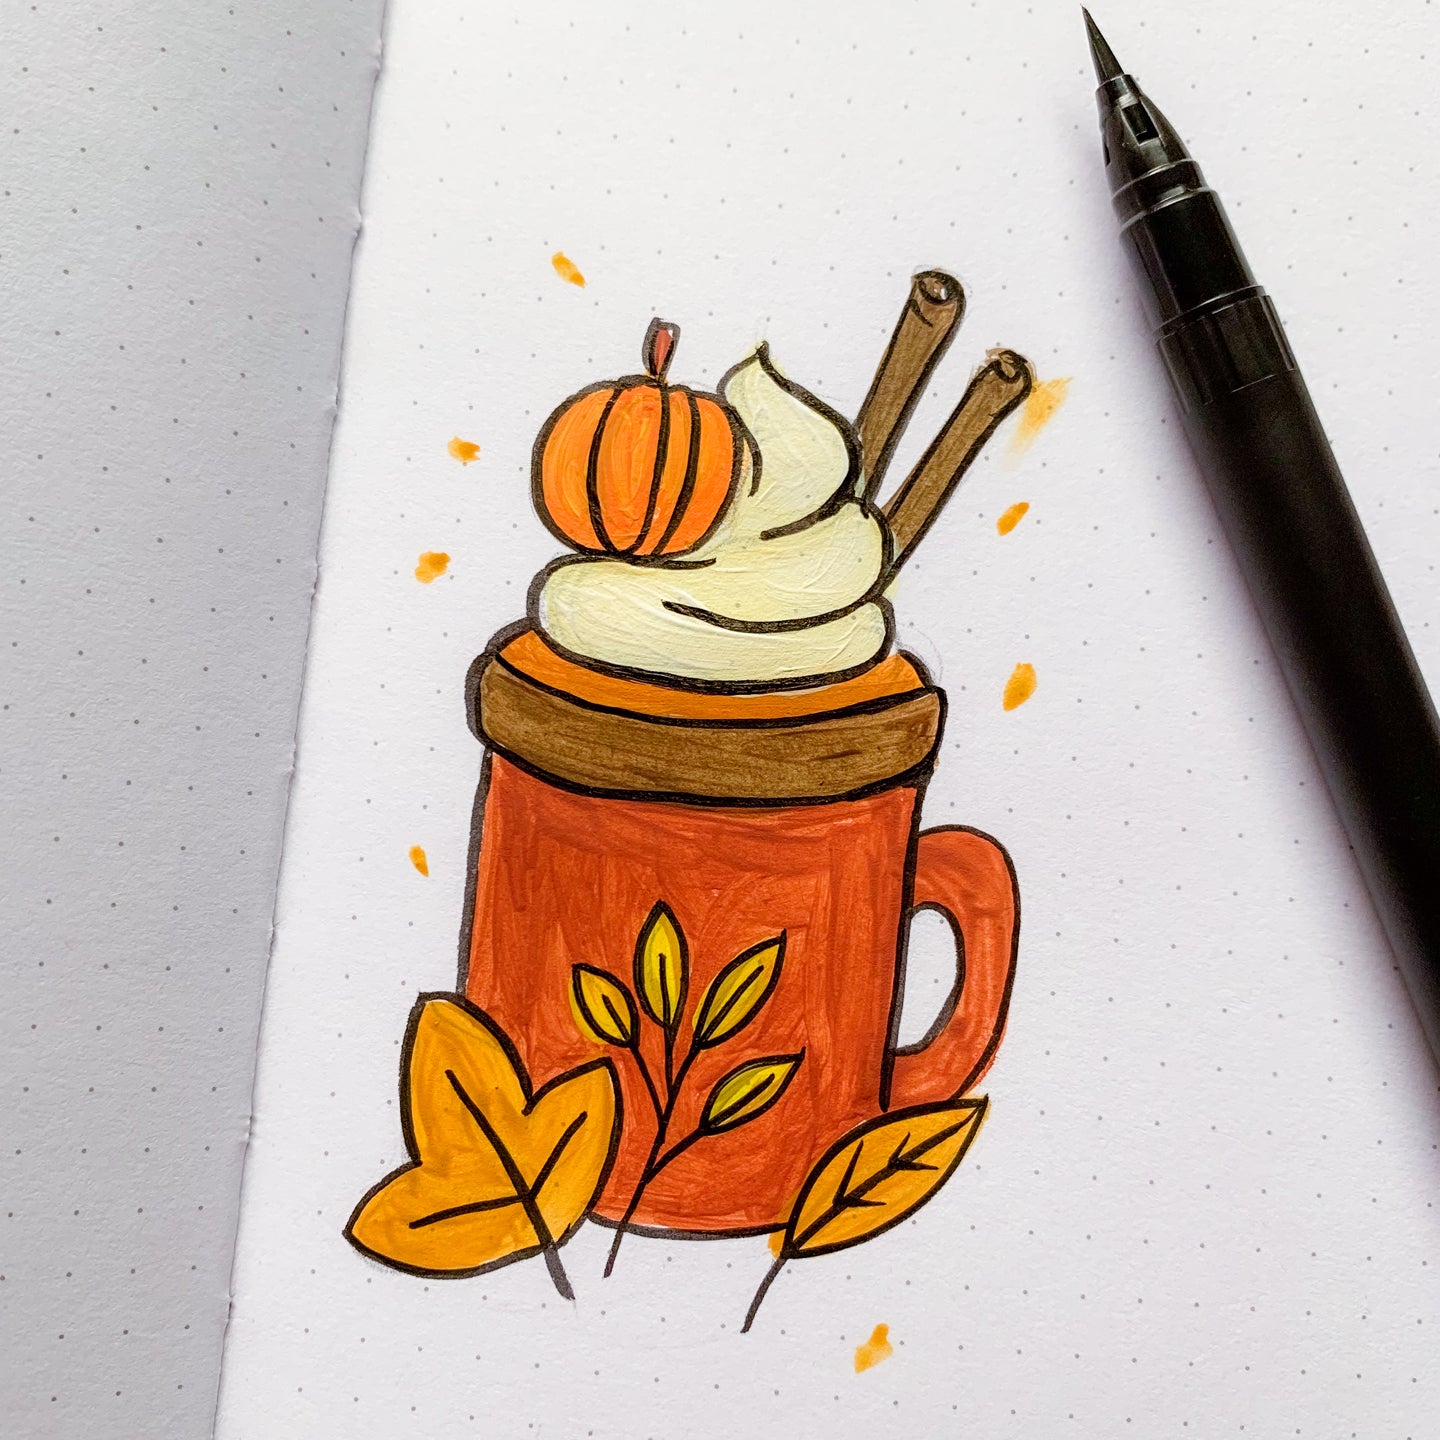 How To Create a PSL Ingredient Spread - String and Space